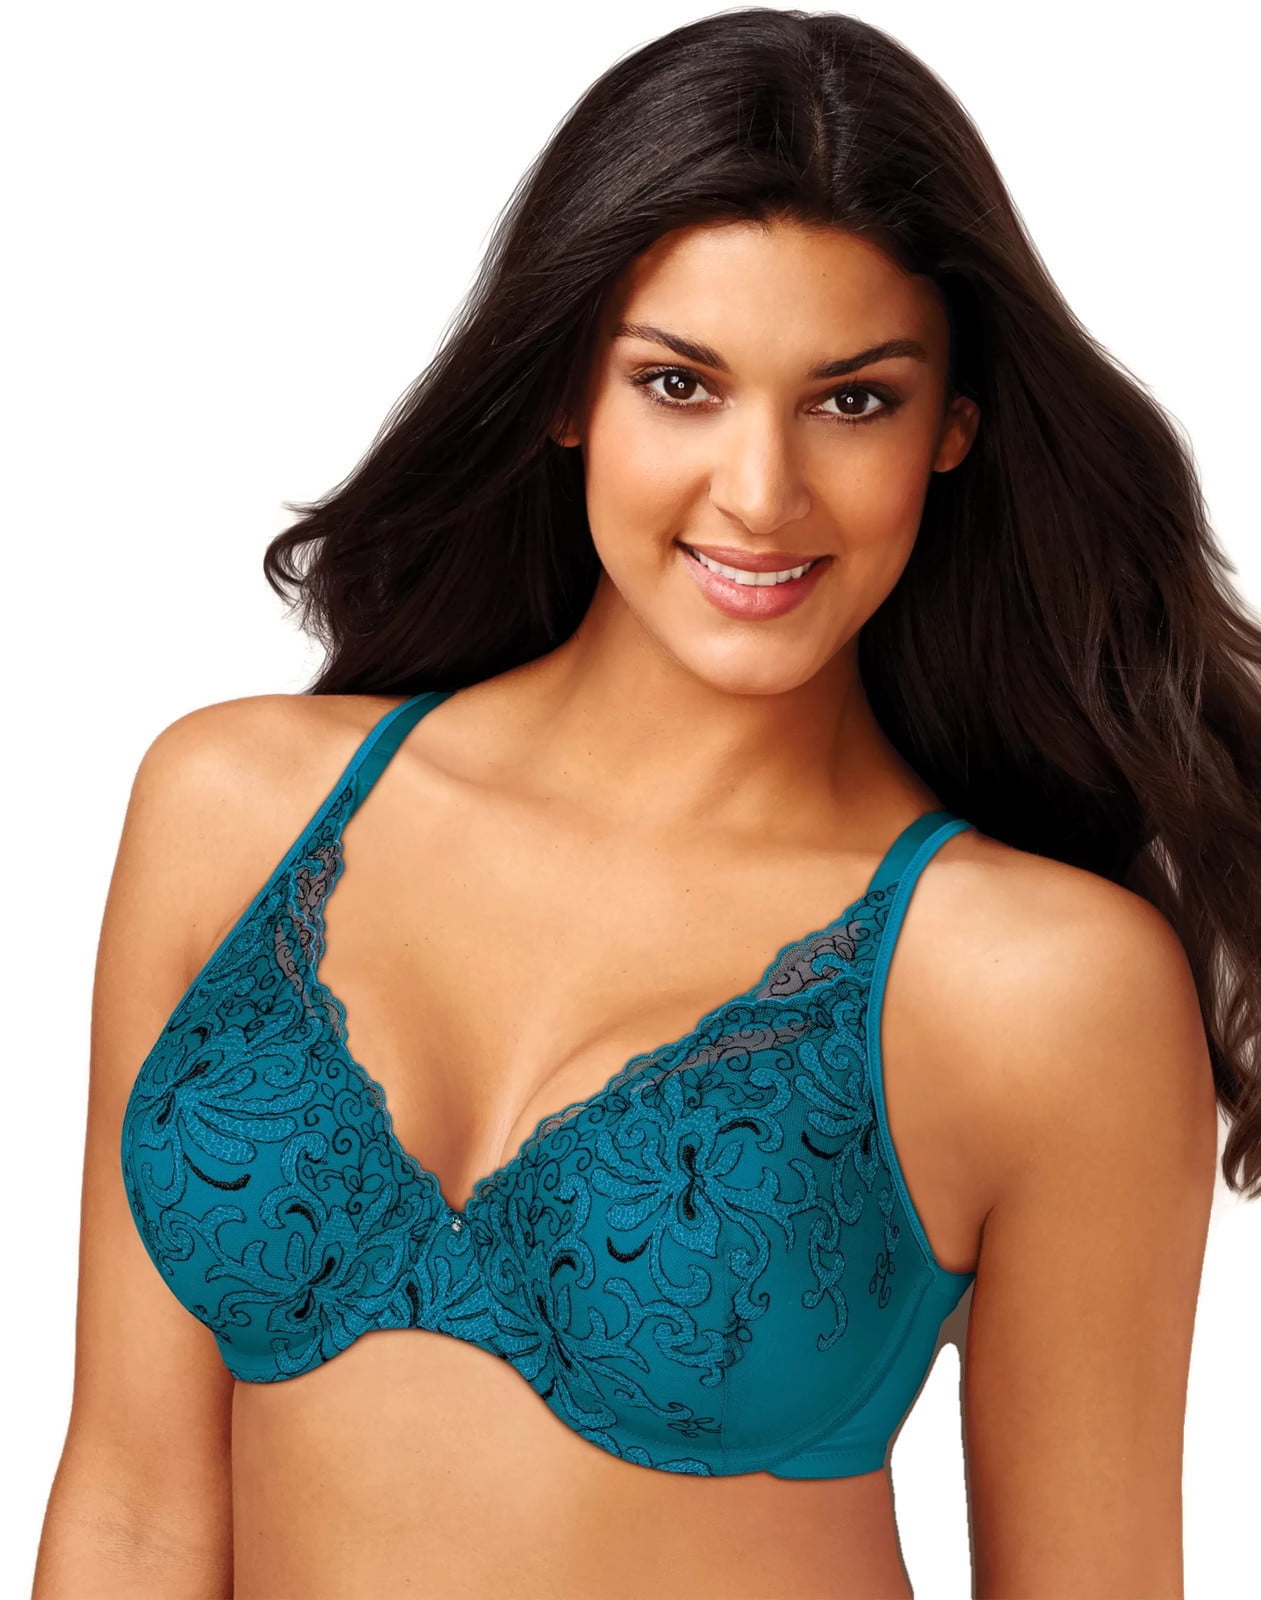 Playtex Secrets Feel Gorgeous® Embroidered Underwire Bra - Size - 36DD -  Color - Teal Tide/Black 